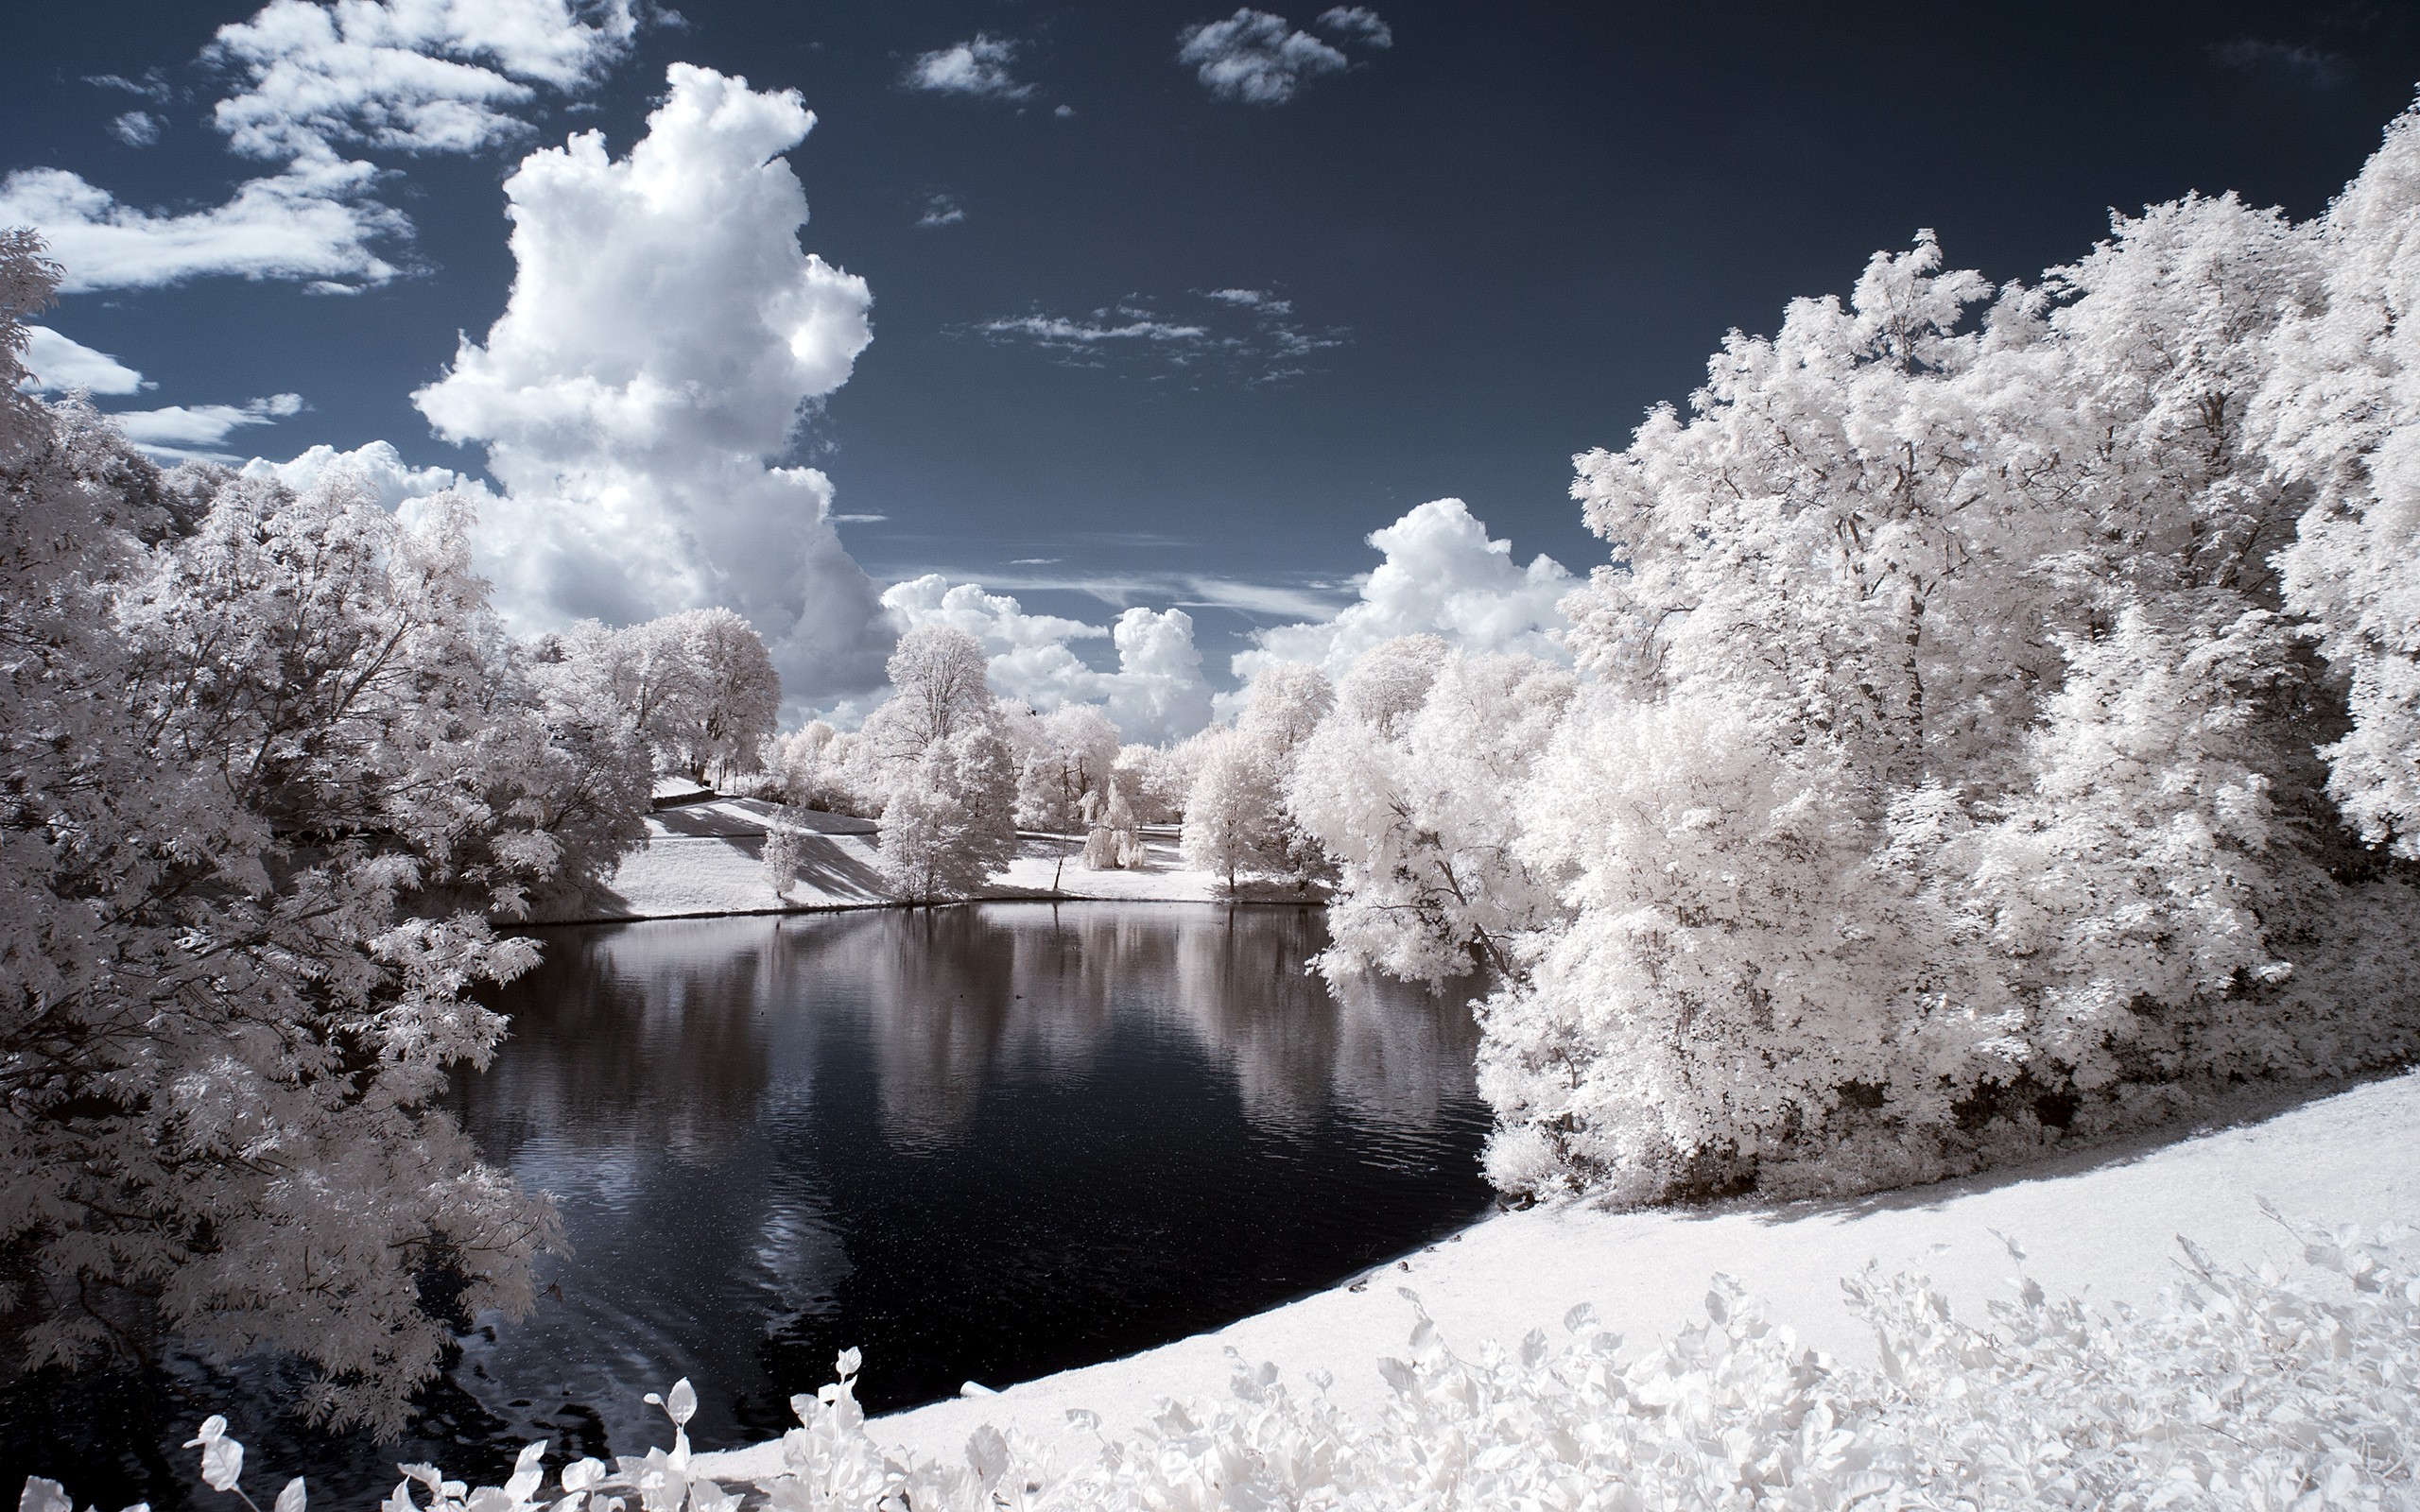 General 2560x1600 nature winter snow trees water pond cold ice landscape